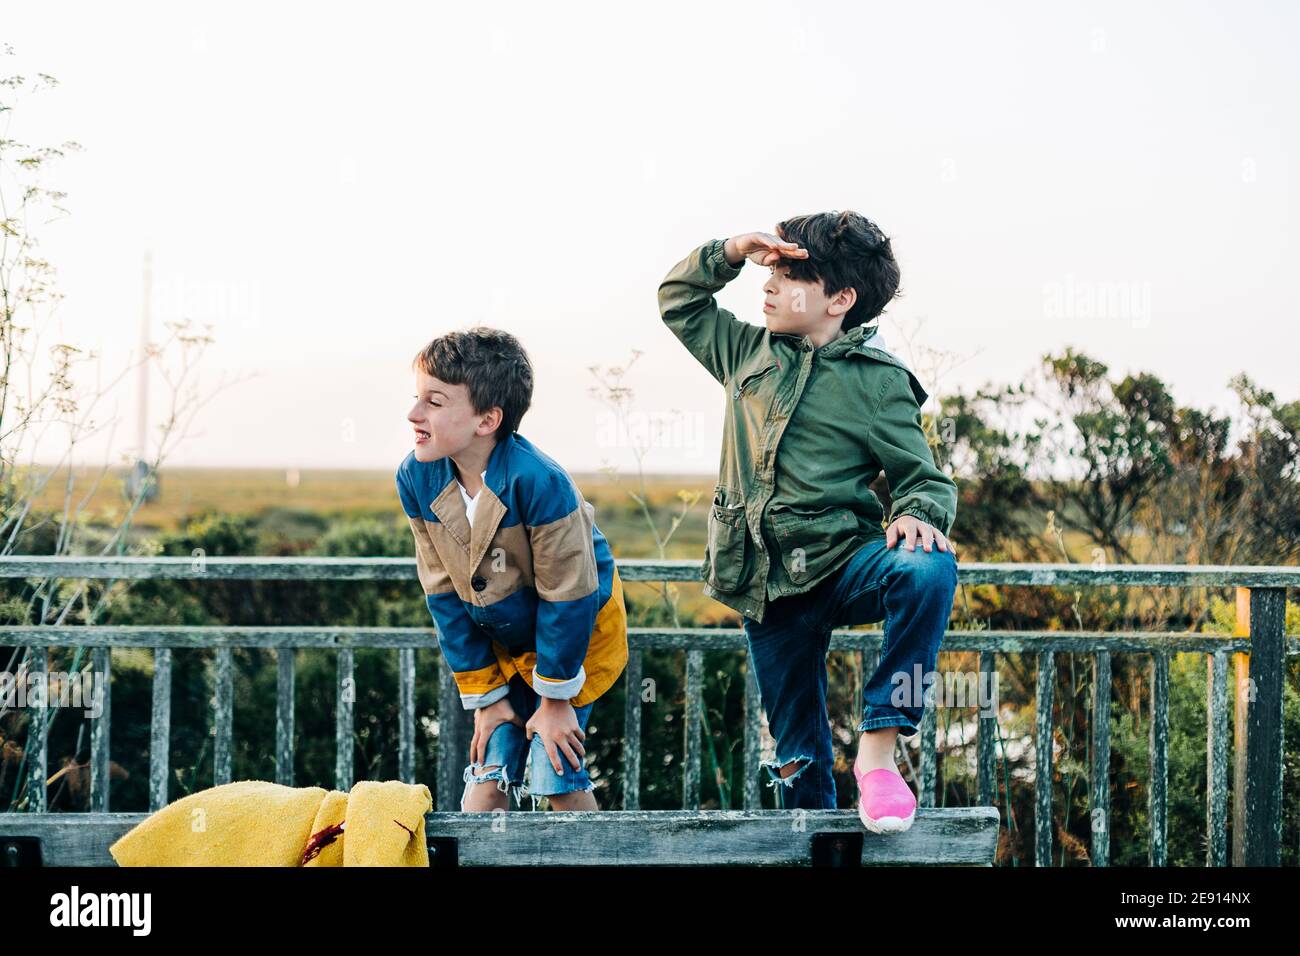 Brothers playing looking away on a natural park bench at sunrise Stock Photo